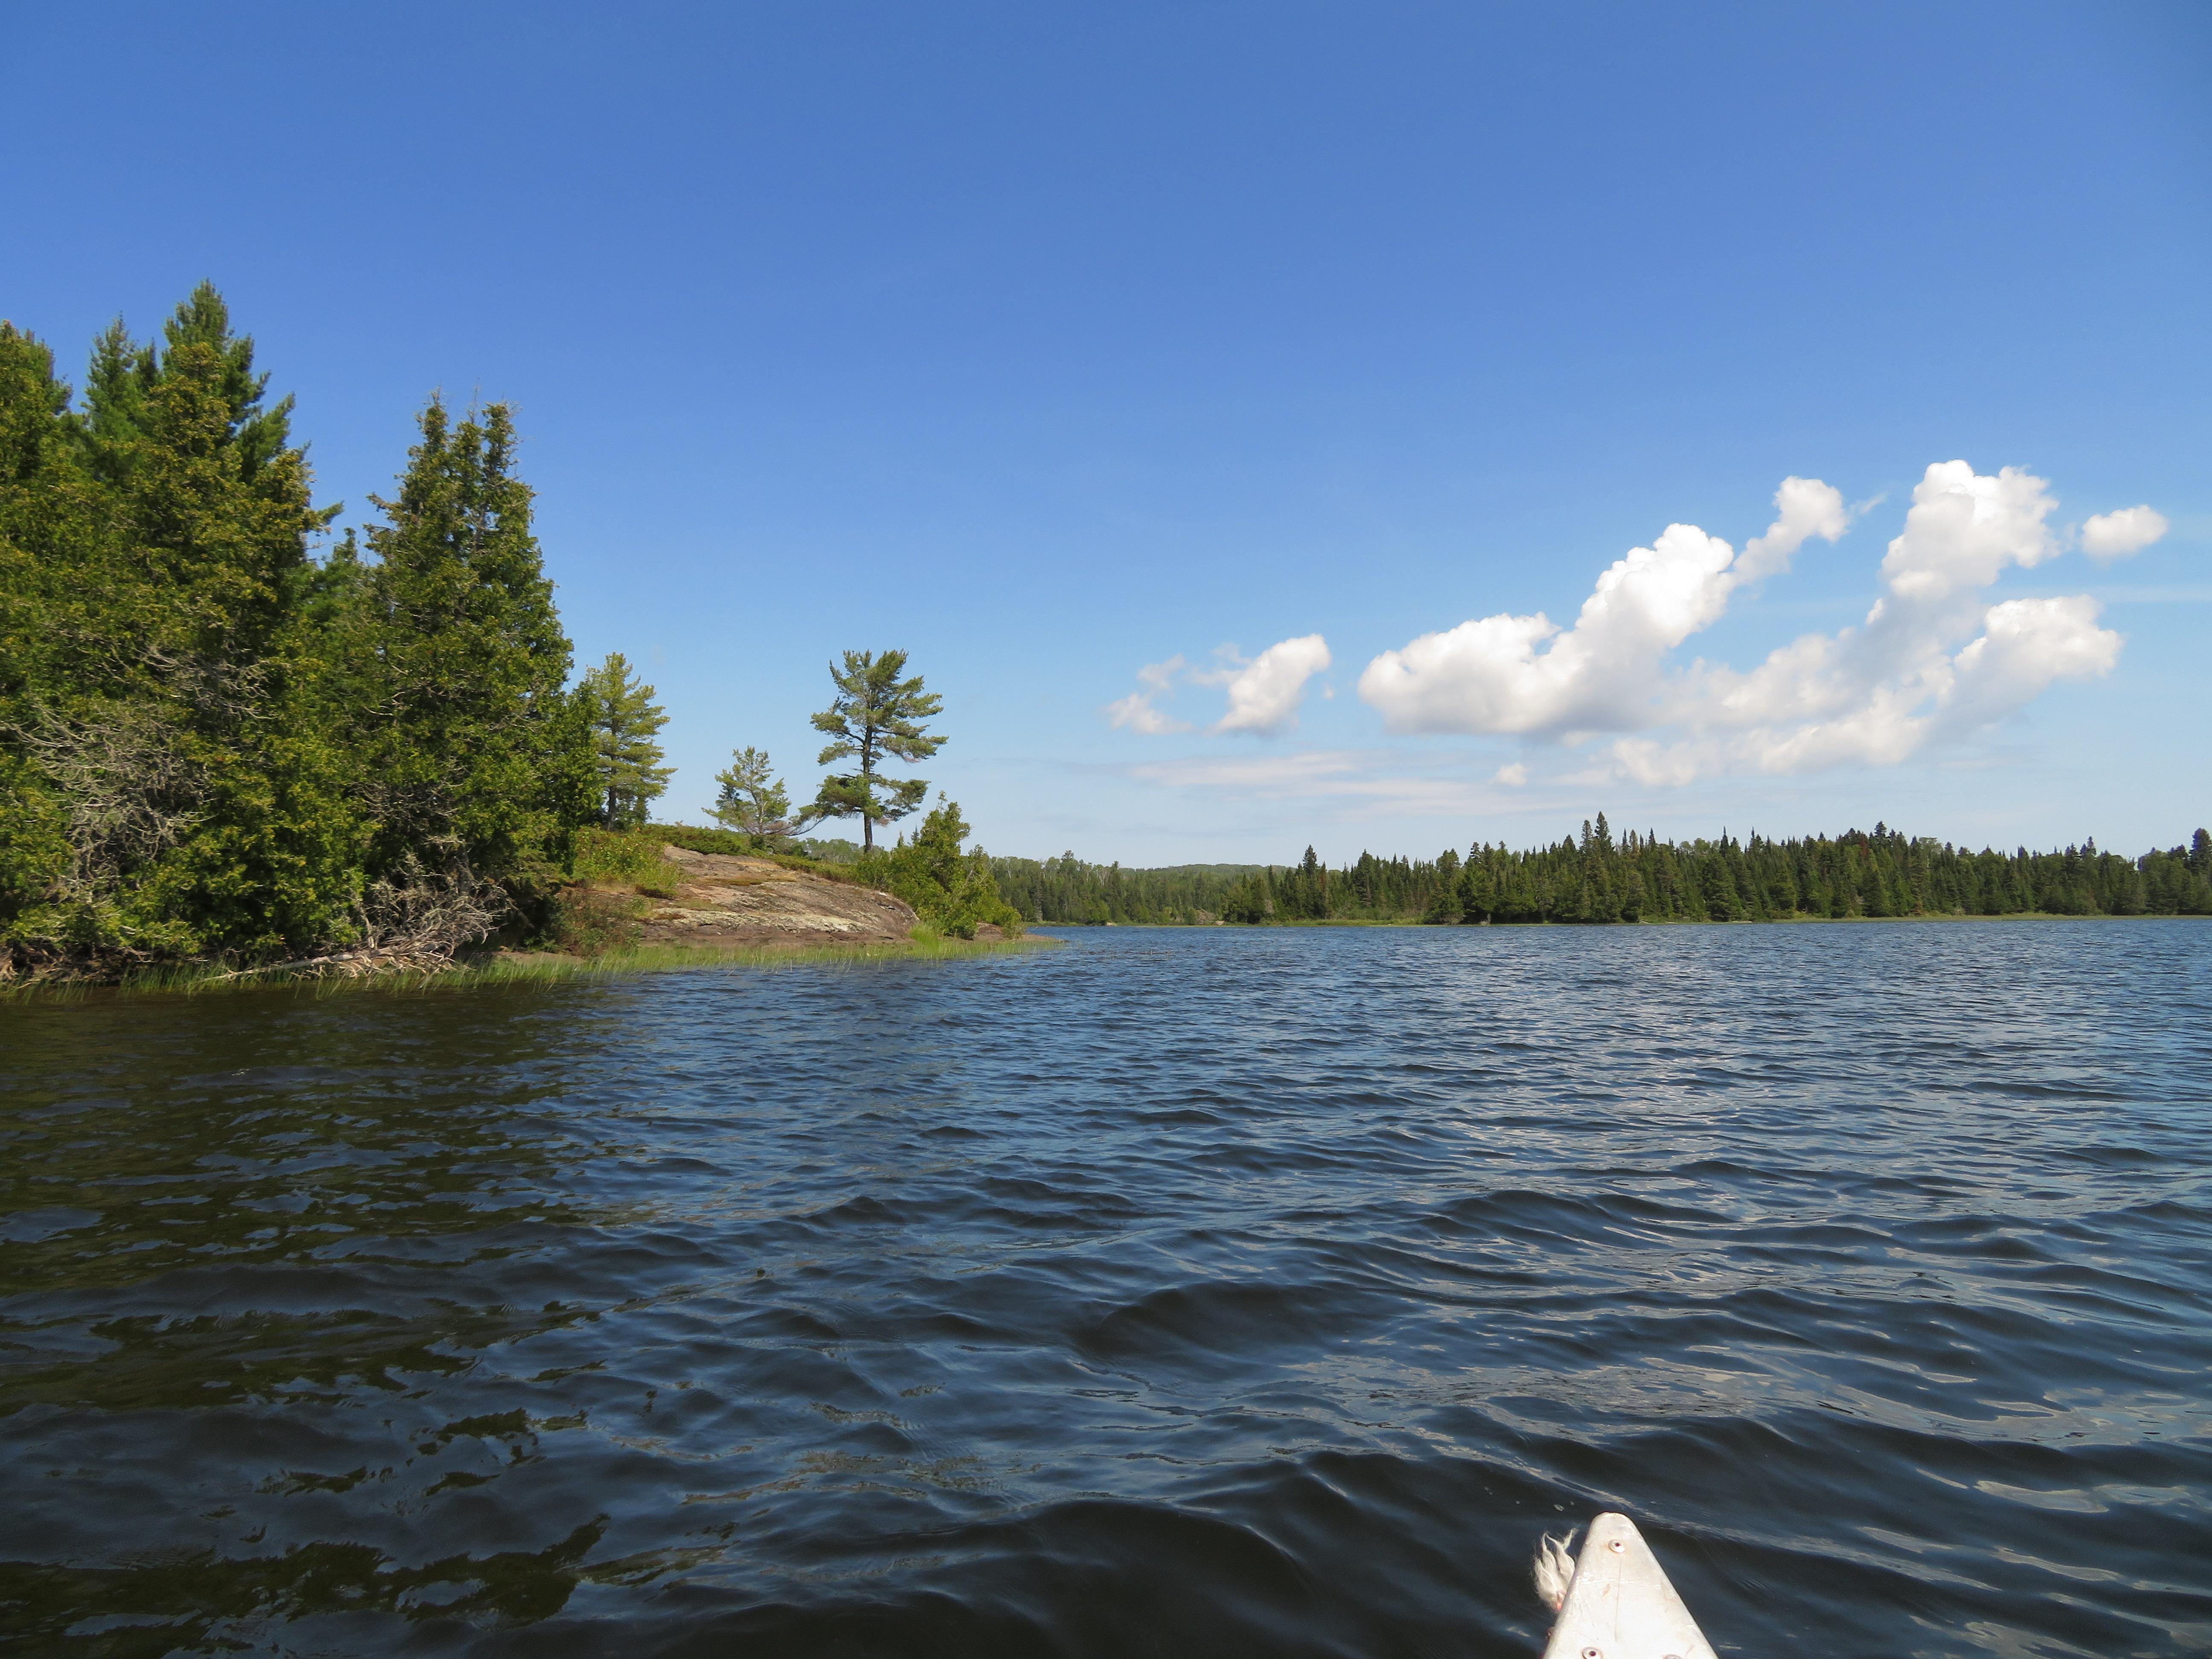 From the water, a view of the distant shoreline where the Lake Richie Canoe Campsite is located.